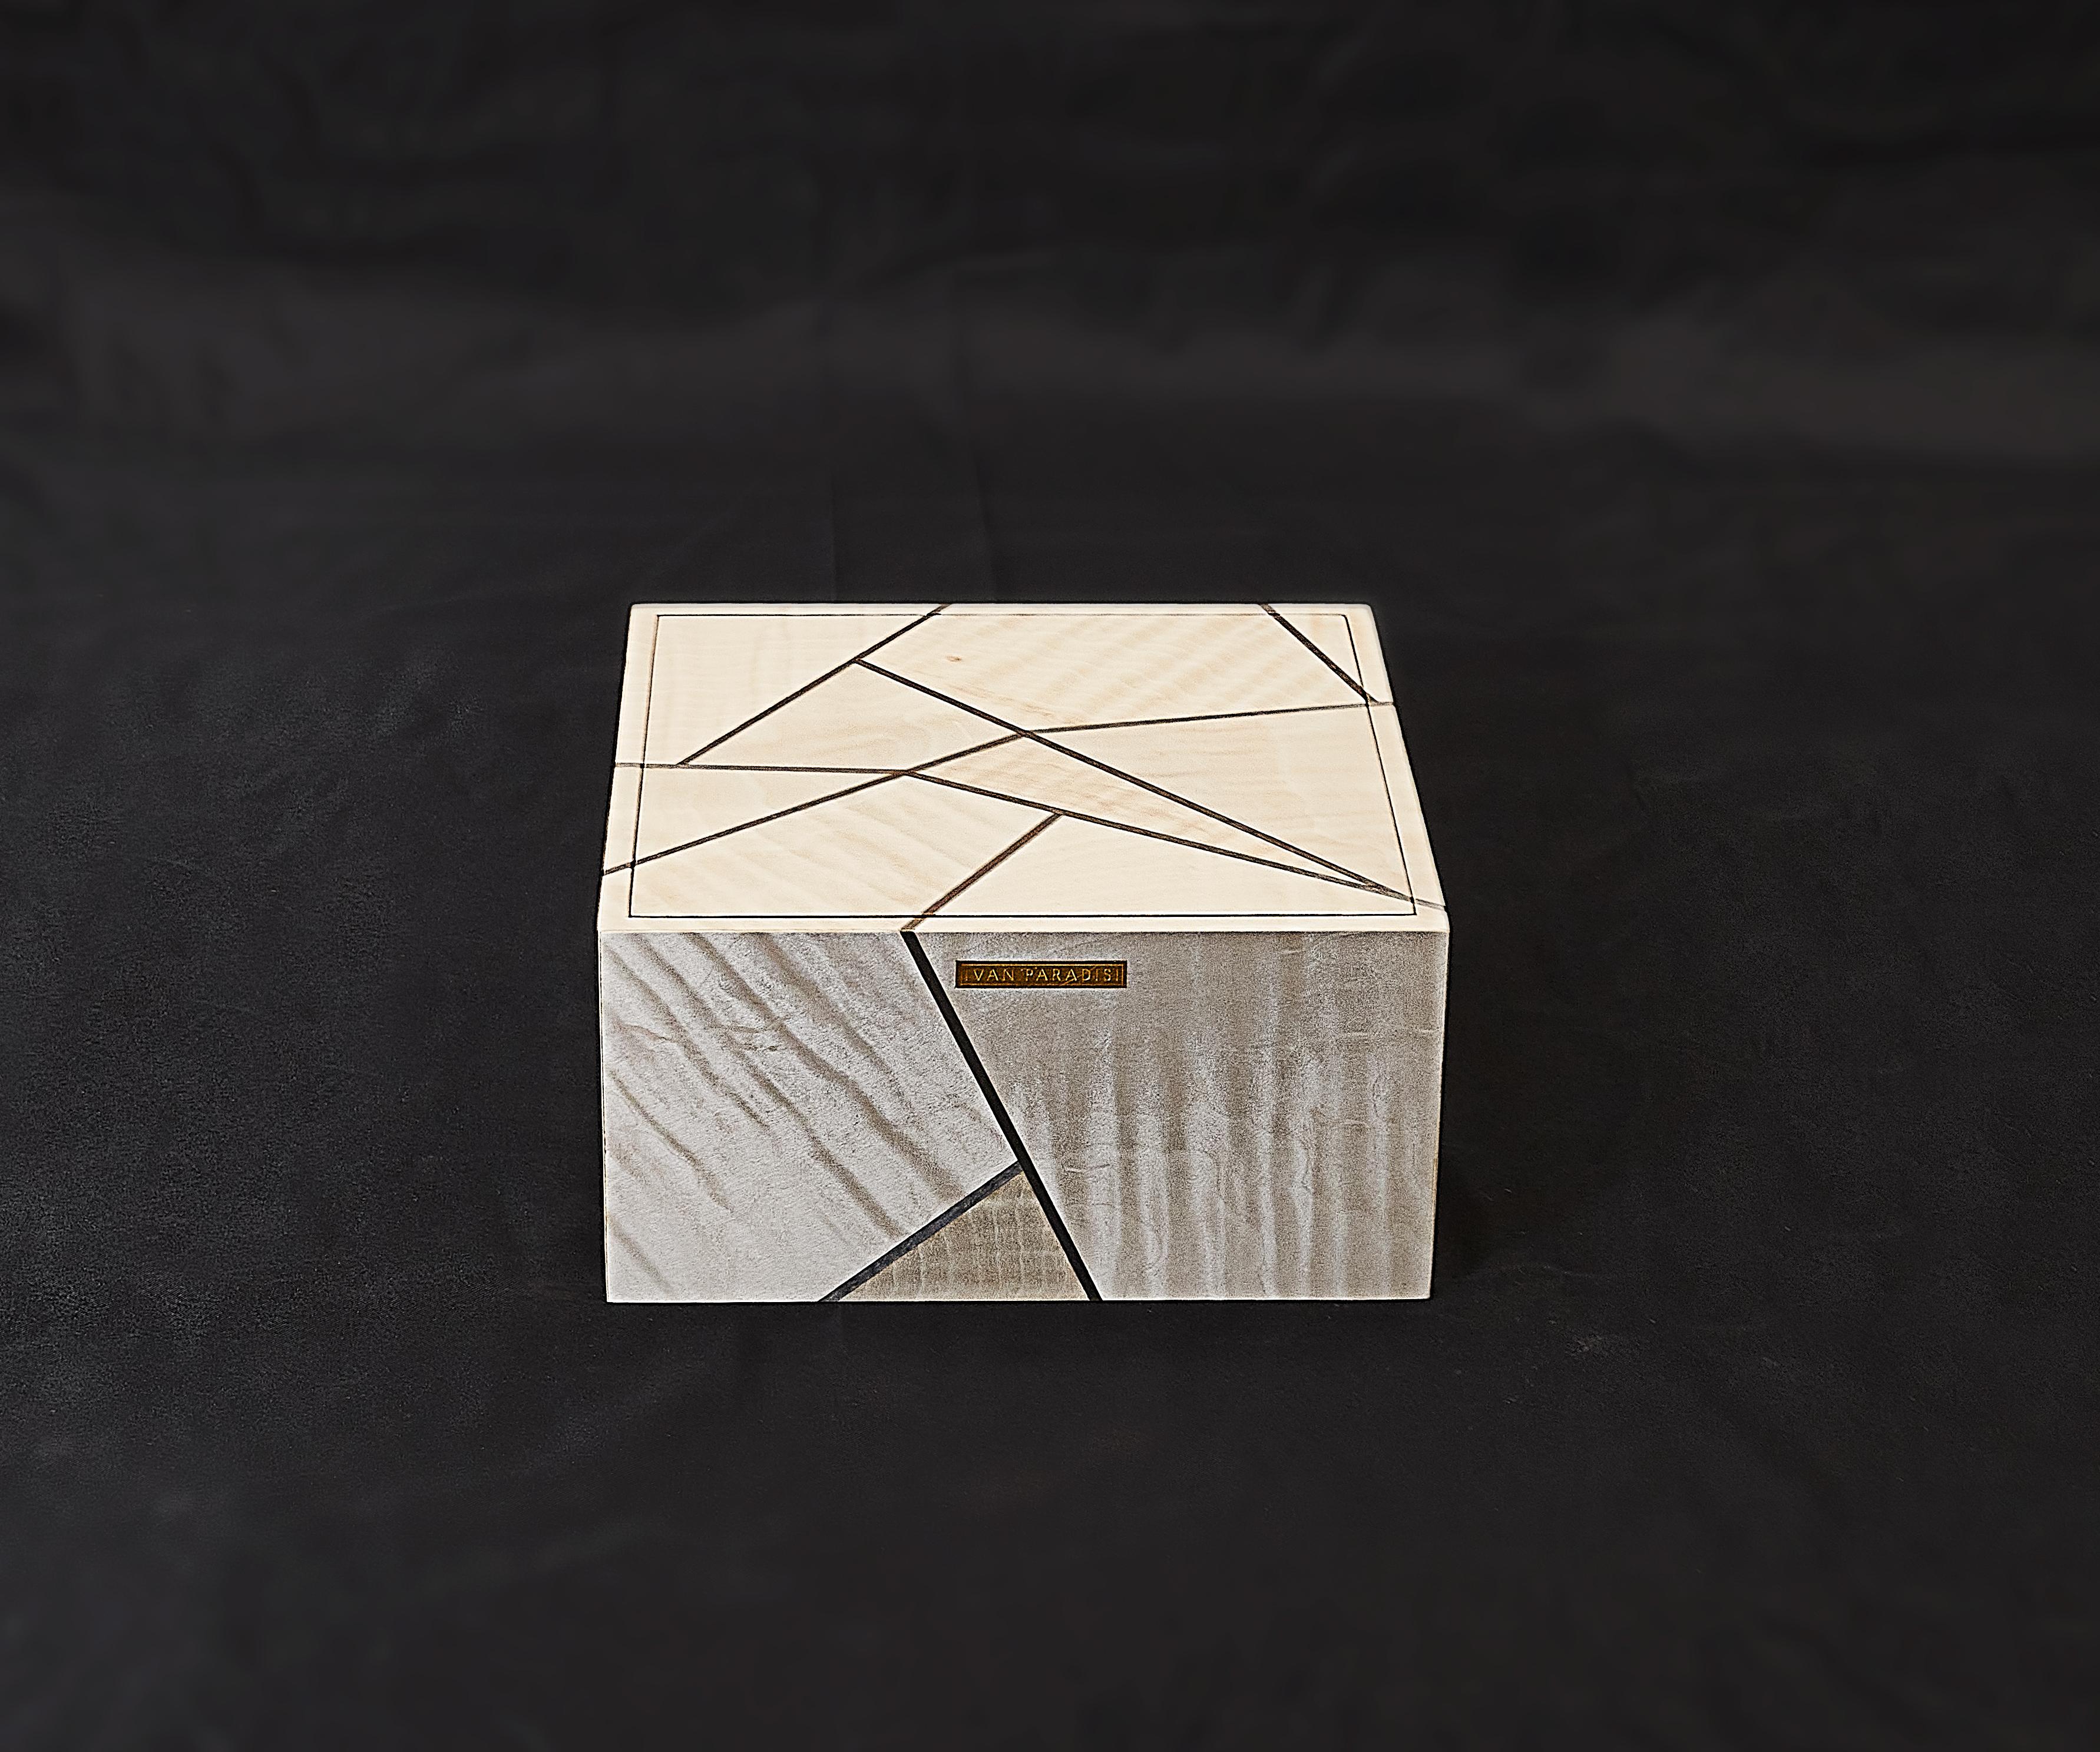 Caruso box is handmade from precious type of wood. Its simple, like accompaniment to Caruso song, design doesn’t need more, as the beauty is in the delicate work of an artisan: the wood is cut in various forms creating a kind of mosaic lined up by